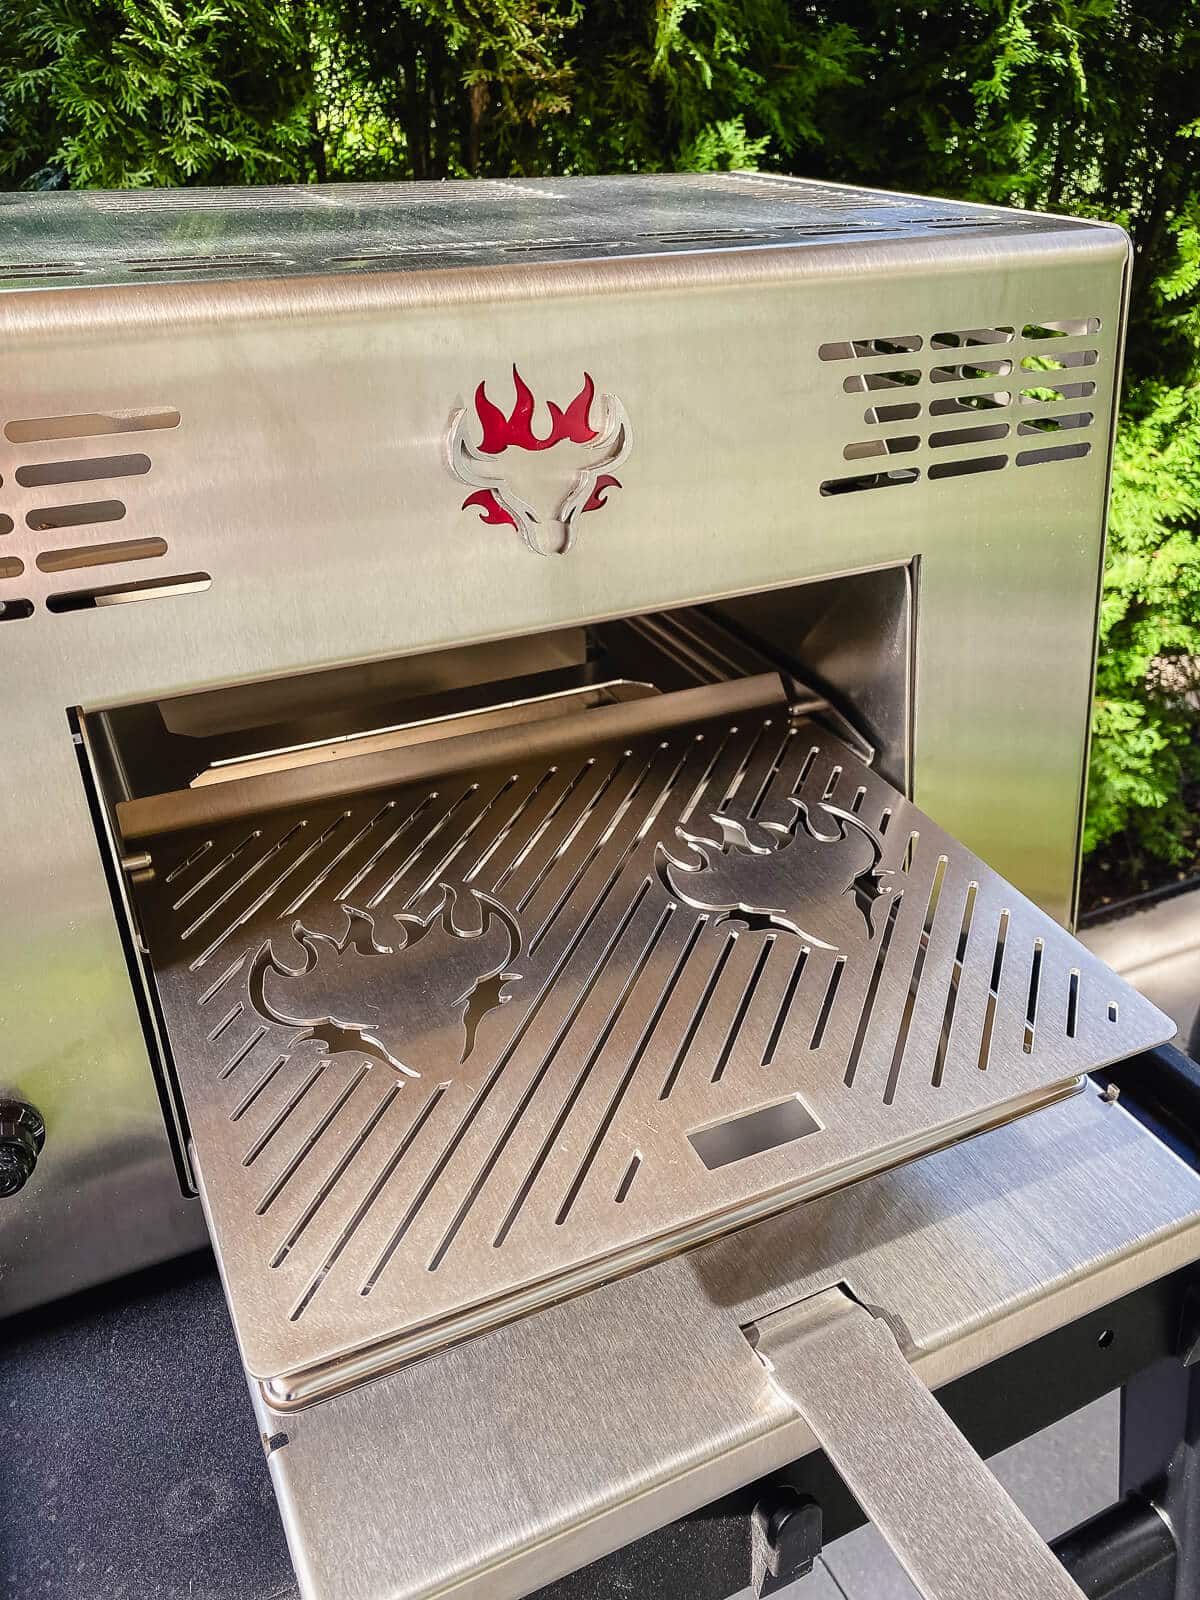 Cooker Review: Delonghi Perfecto Electric Indoor Grill - Grill Product  Reviews - Grillseeker